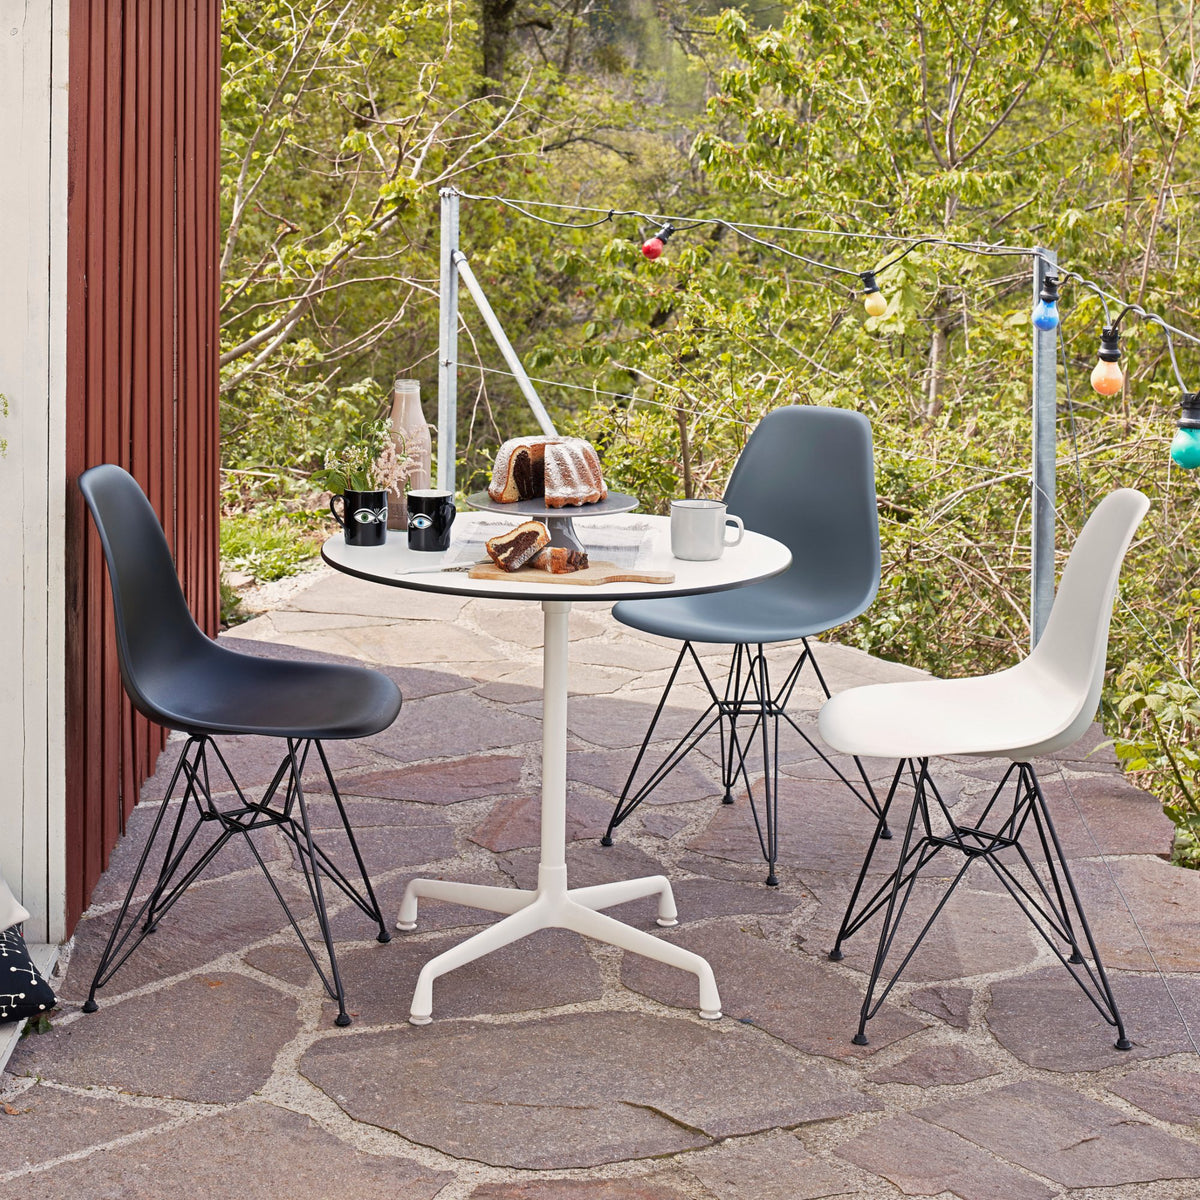 Vitra Eames Plastic Side Chair DSR Powder Coated for Outdoor Use. Courtyard Chair Setting